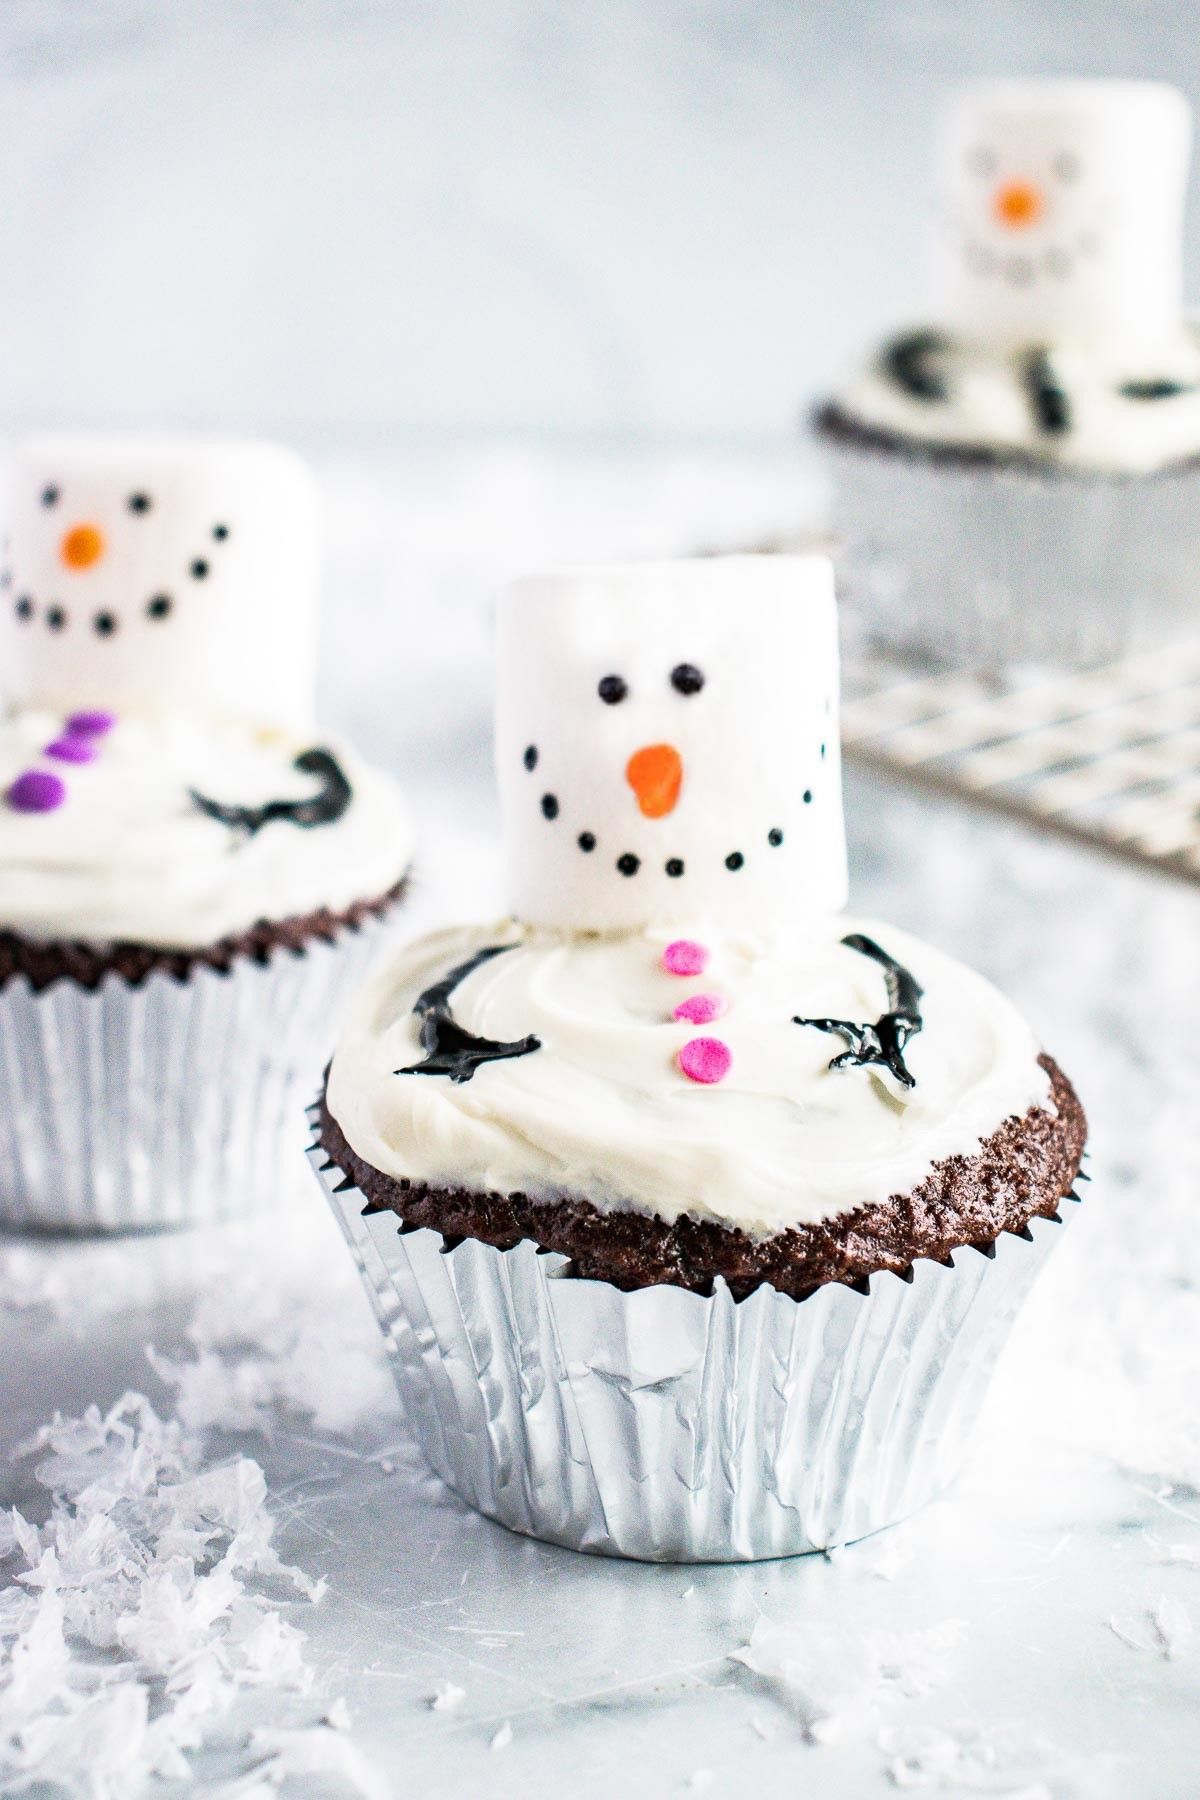 Christmas Cupcakes With Recipes To Make This Year - Brit + Co